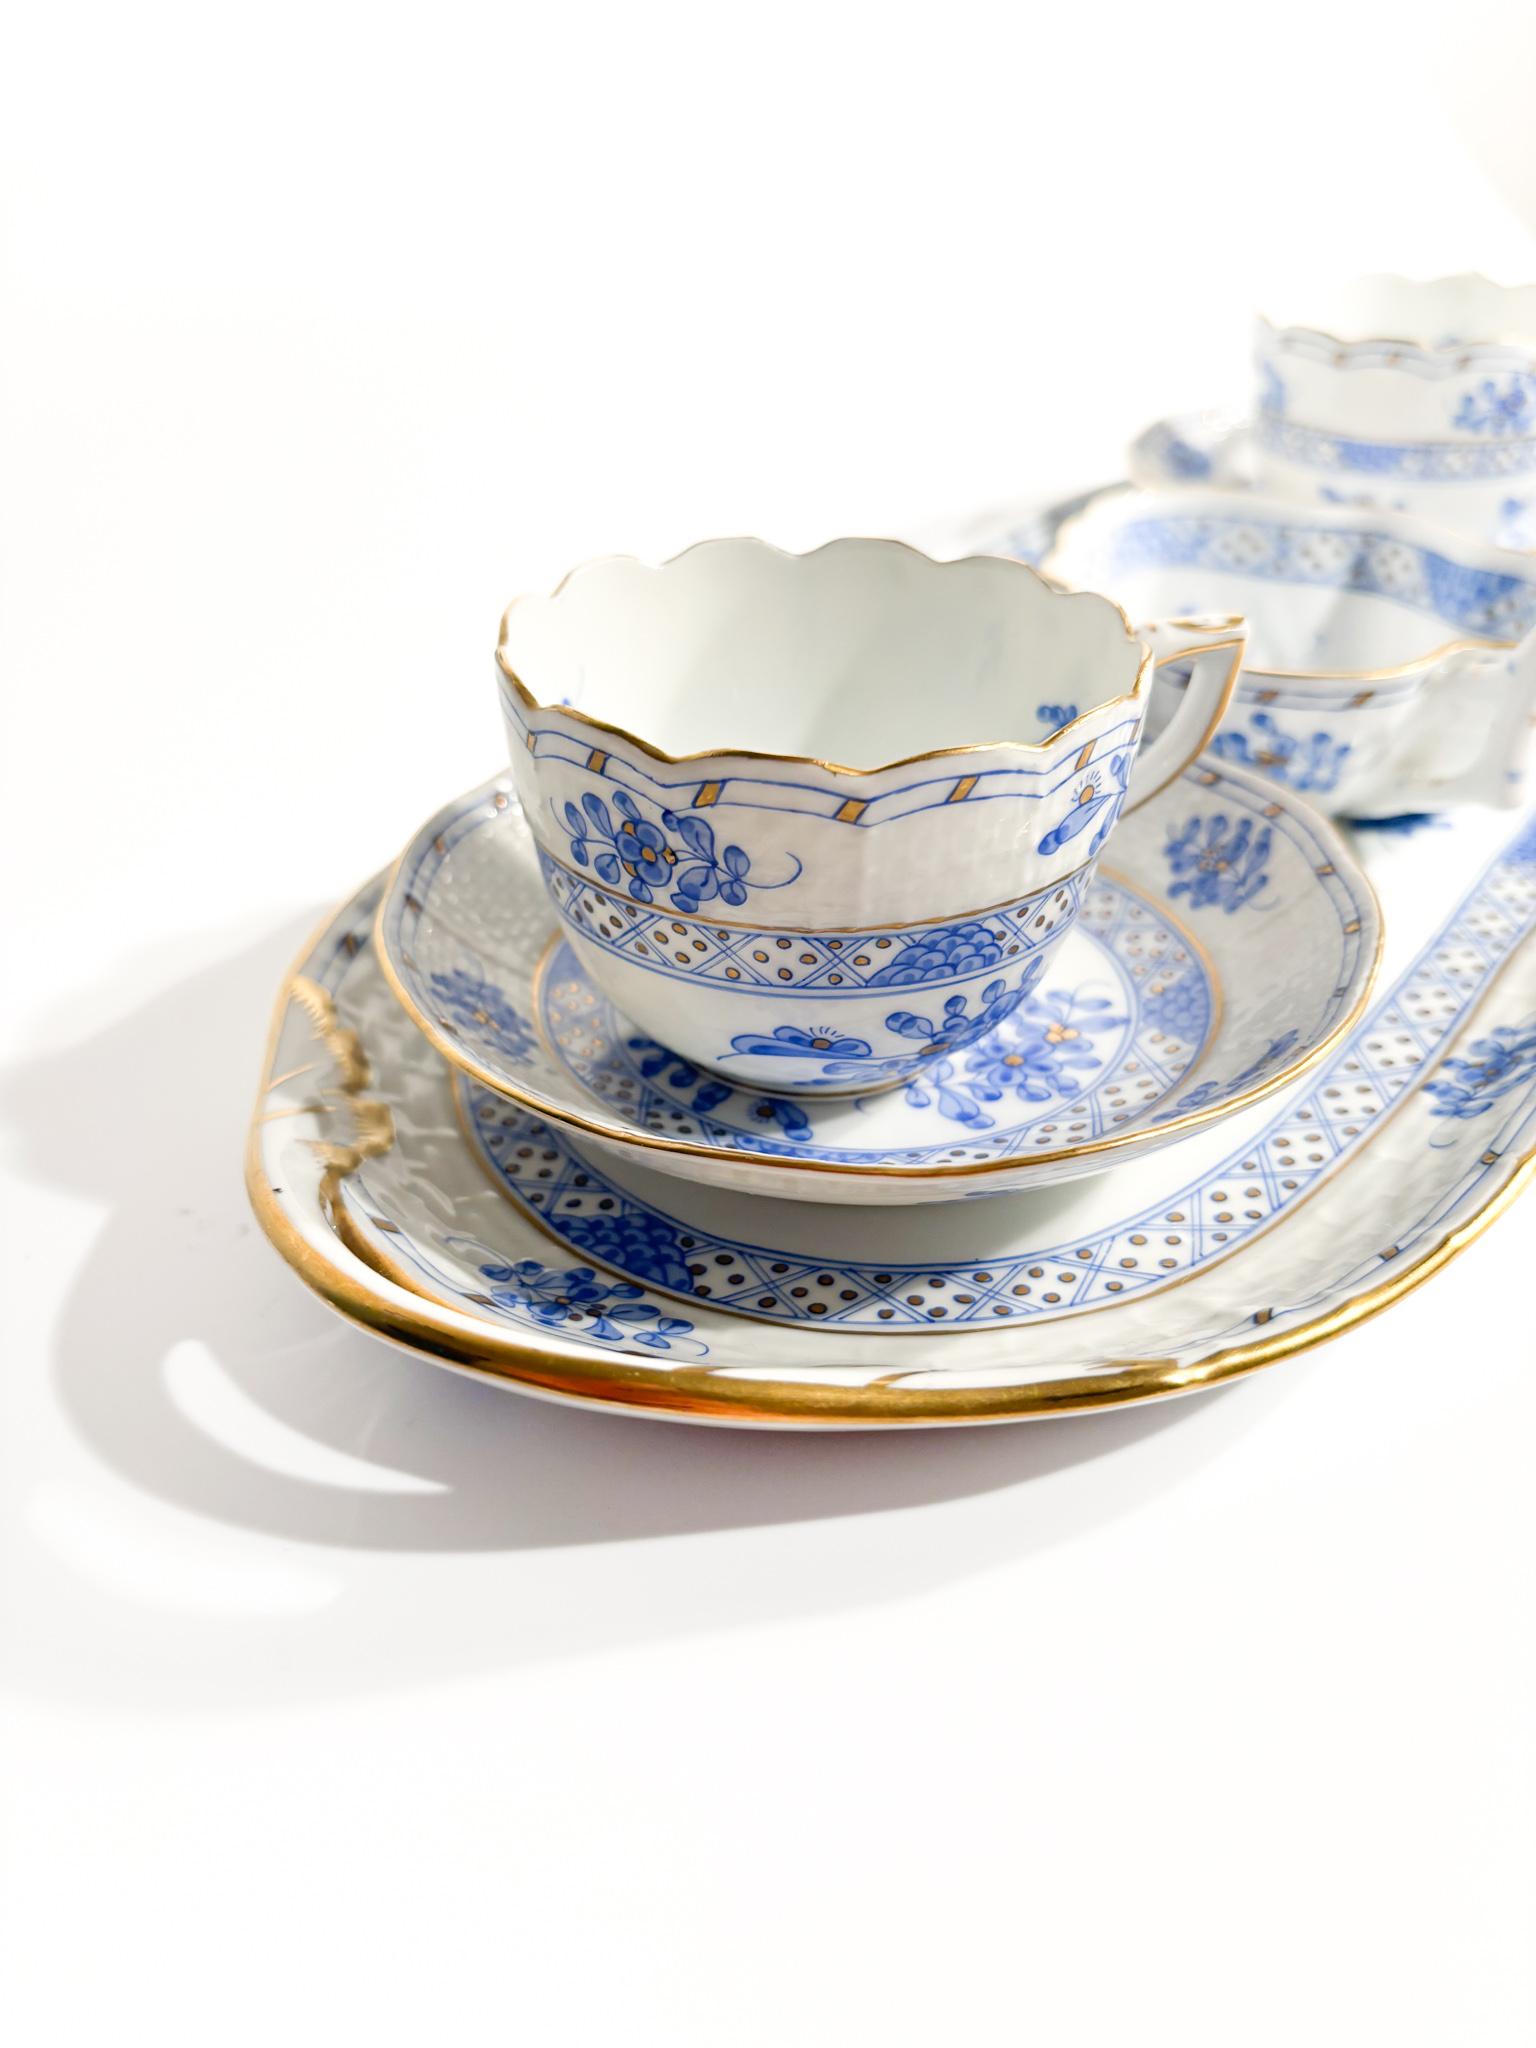 Mid-20th Century Herend Waldstein Porcelain Tete a Tete Service from the 1950s For Sale